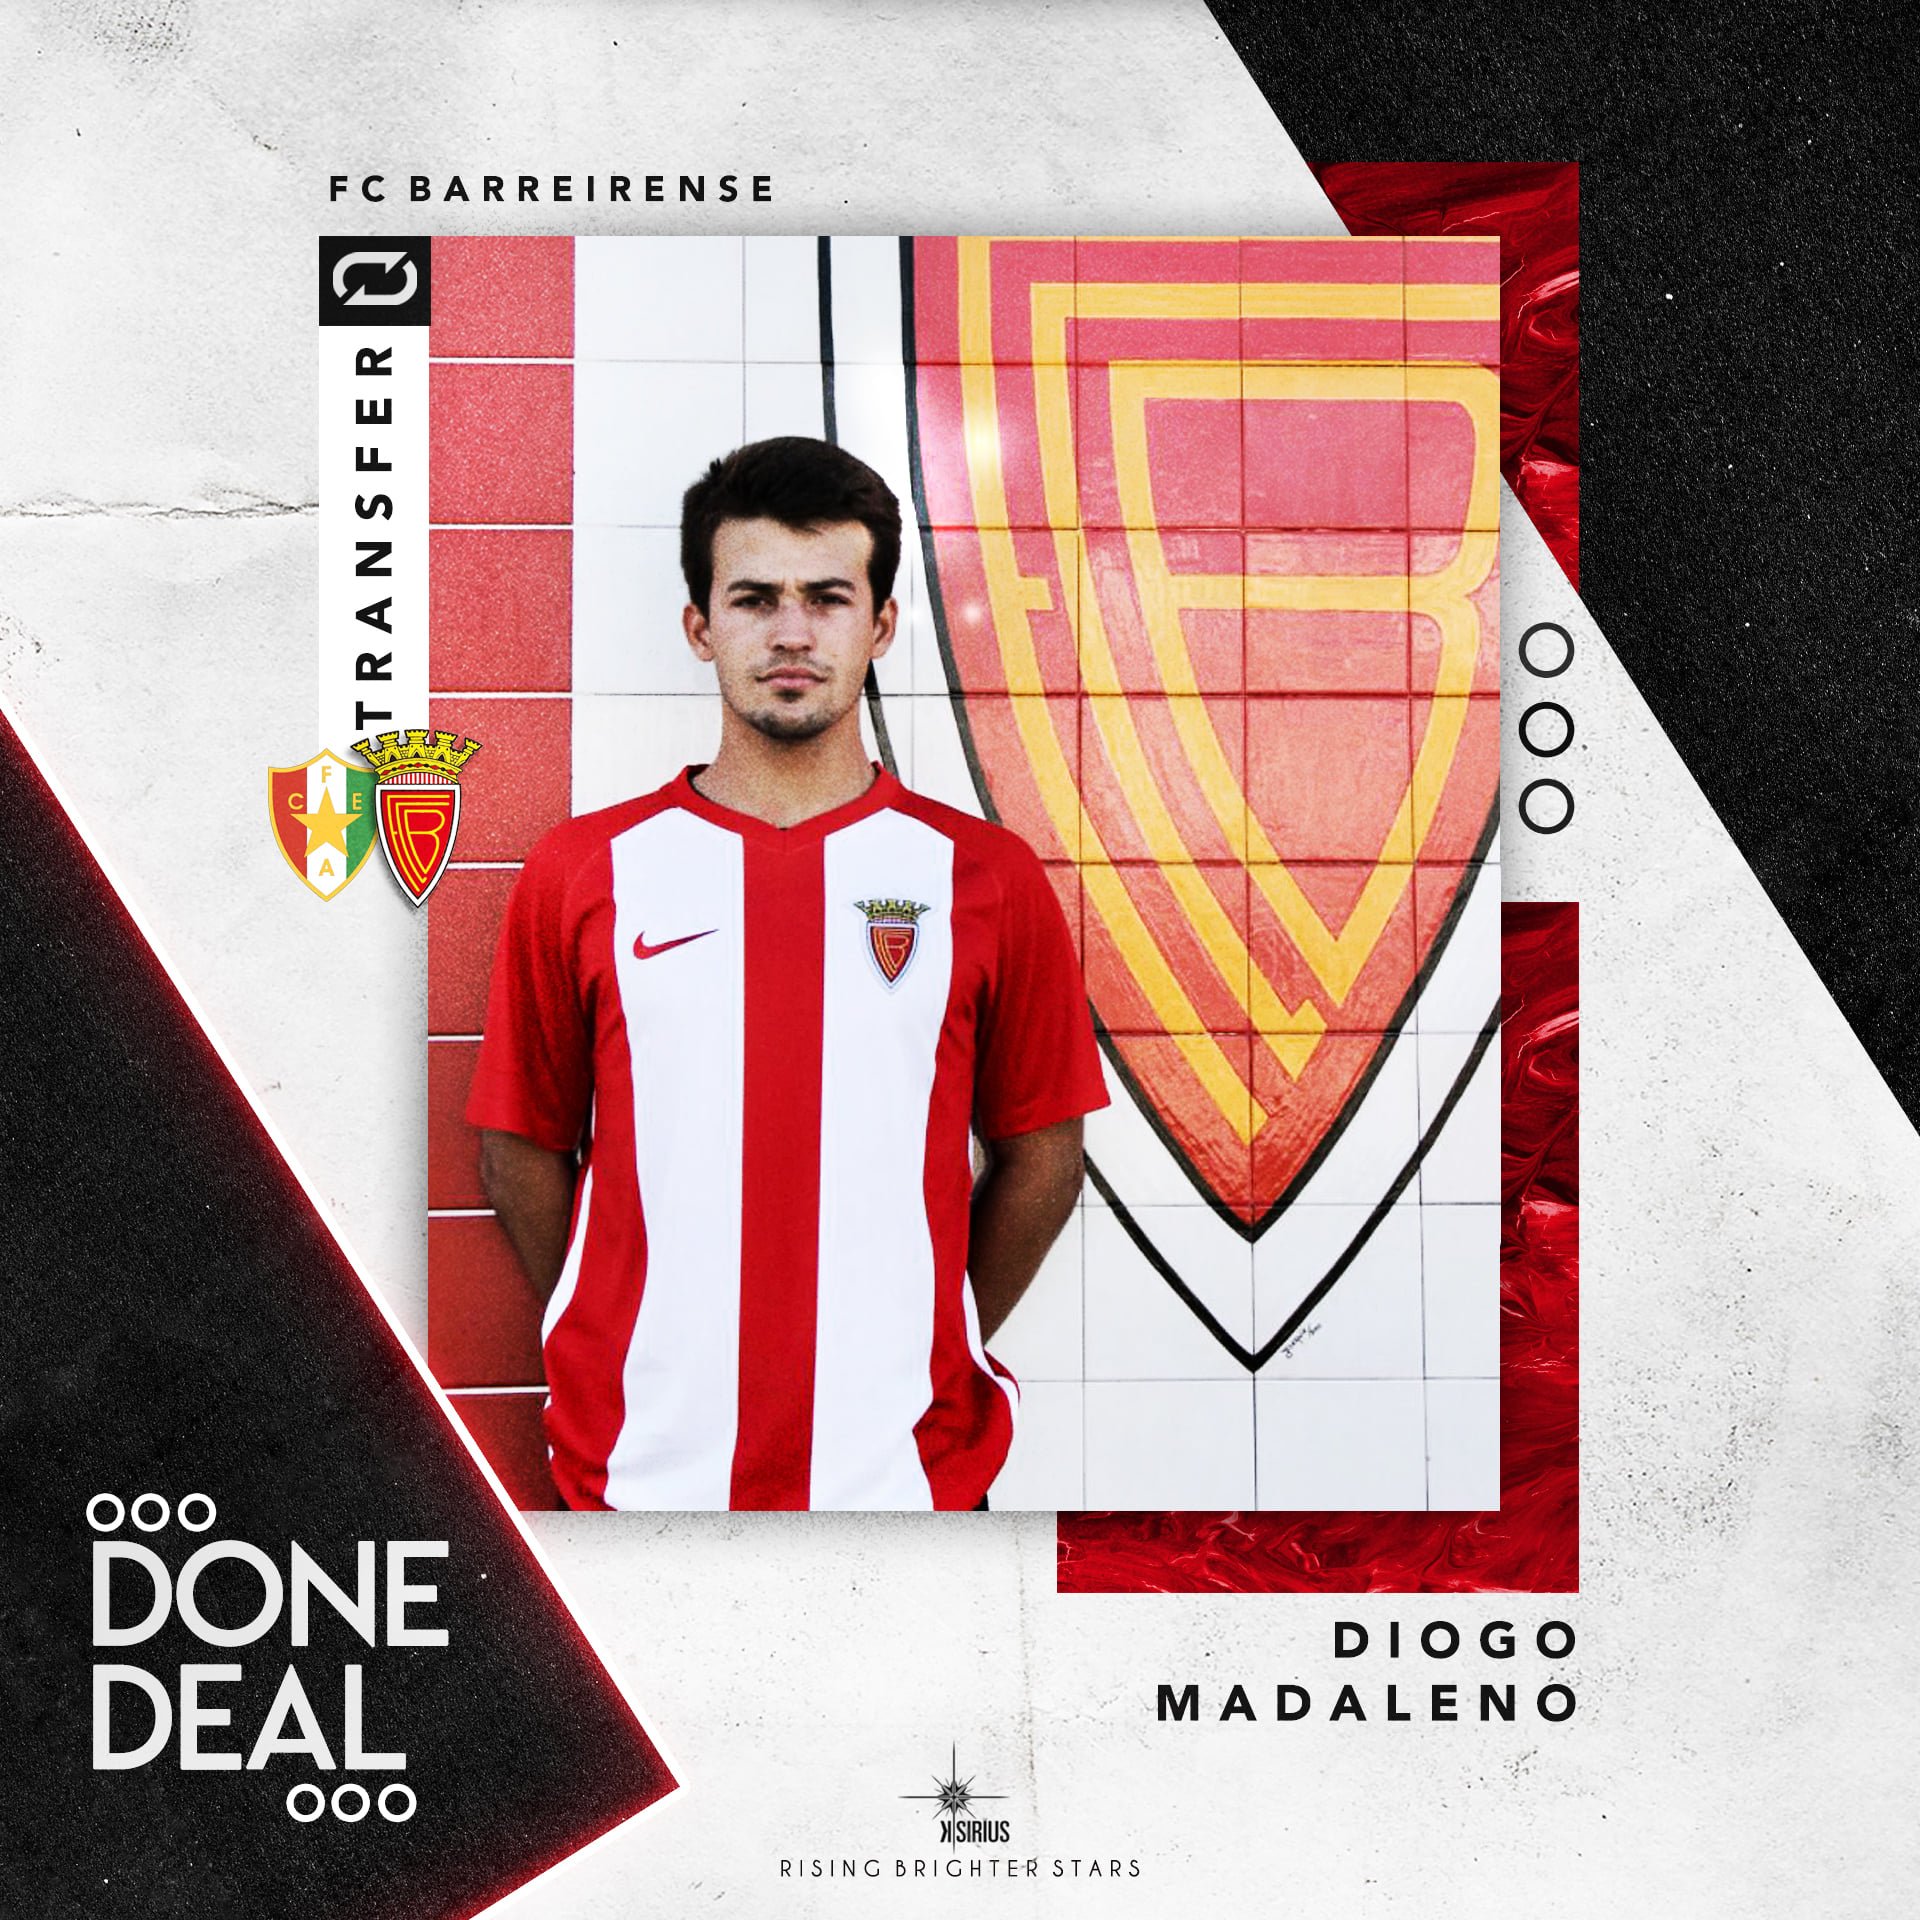 Signing: Diogo Madaleno with F.C. Barreirense